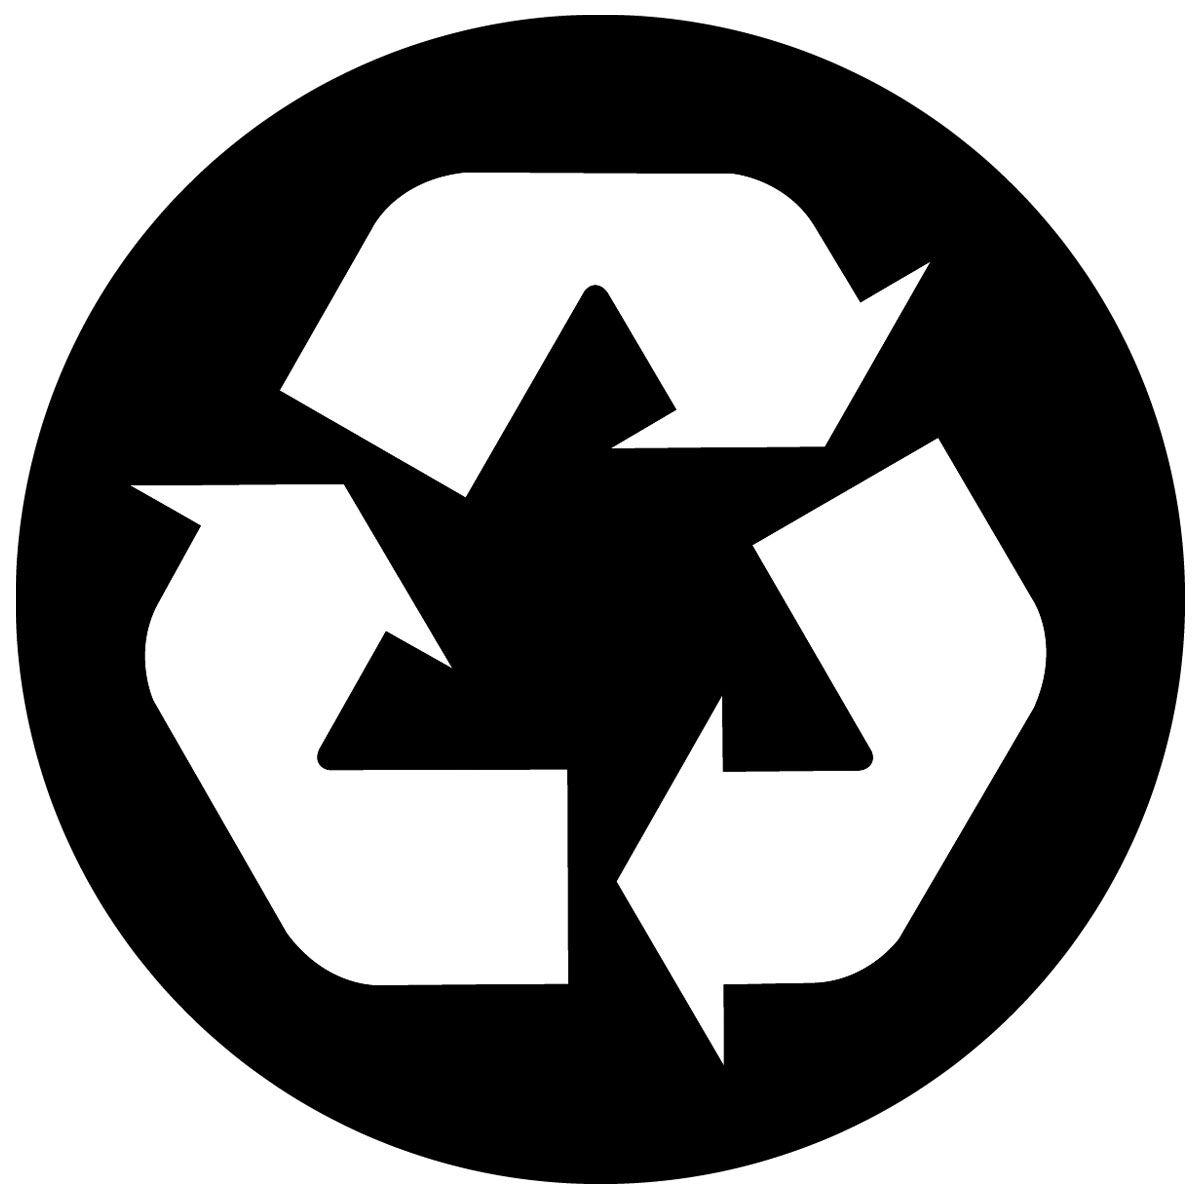 Black and White Recycle Logo - Free Recycle Symbol, Download Free Clip Art, Free Clip Art on ...